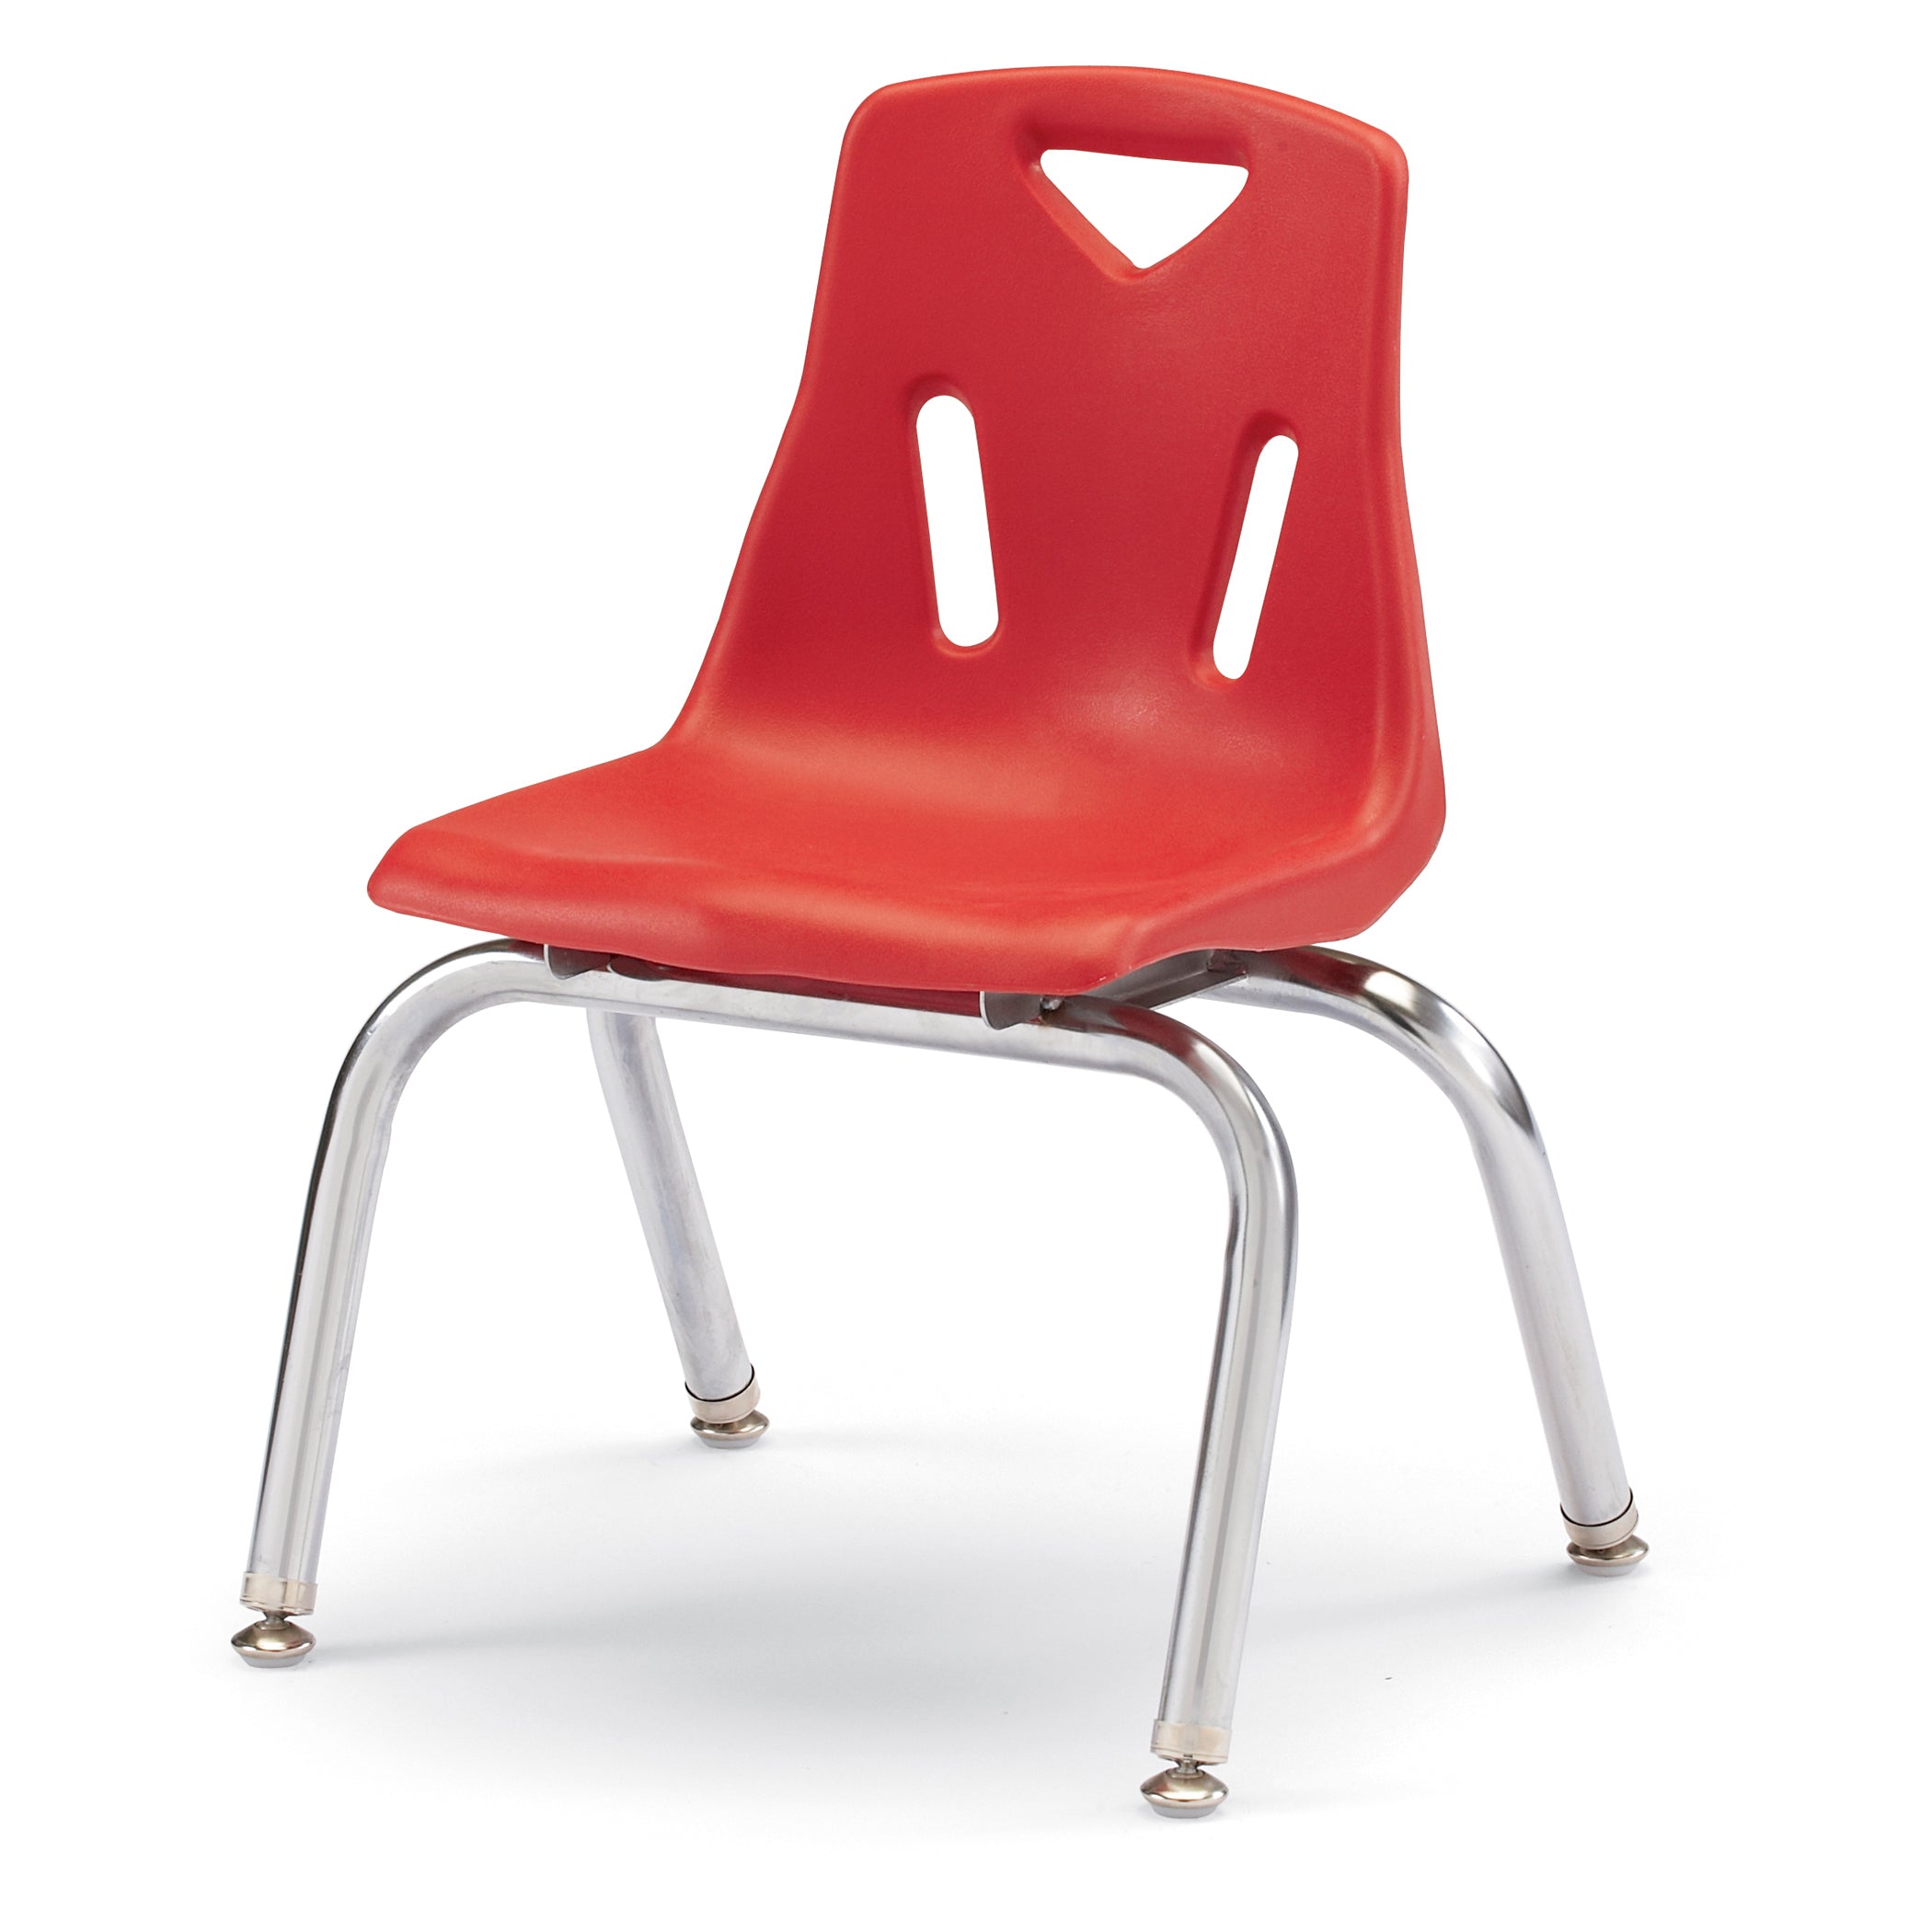 8142JC1008, Berries Stacking Chair with Chrome-Plated Legs - 12" Ht - Red